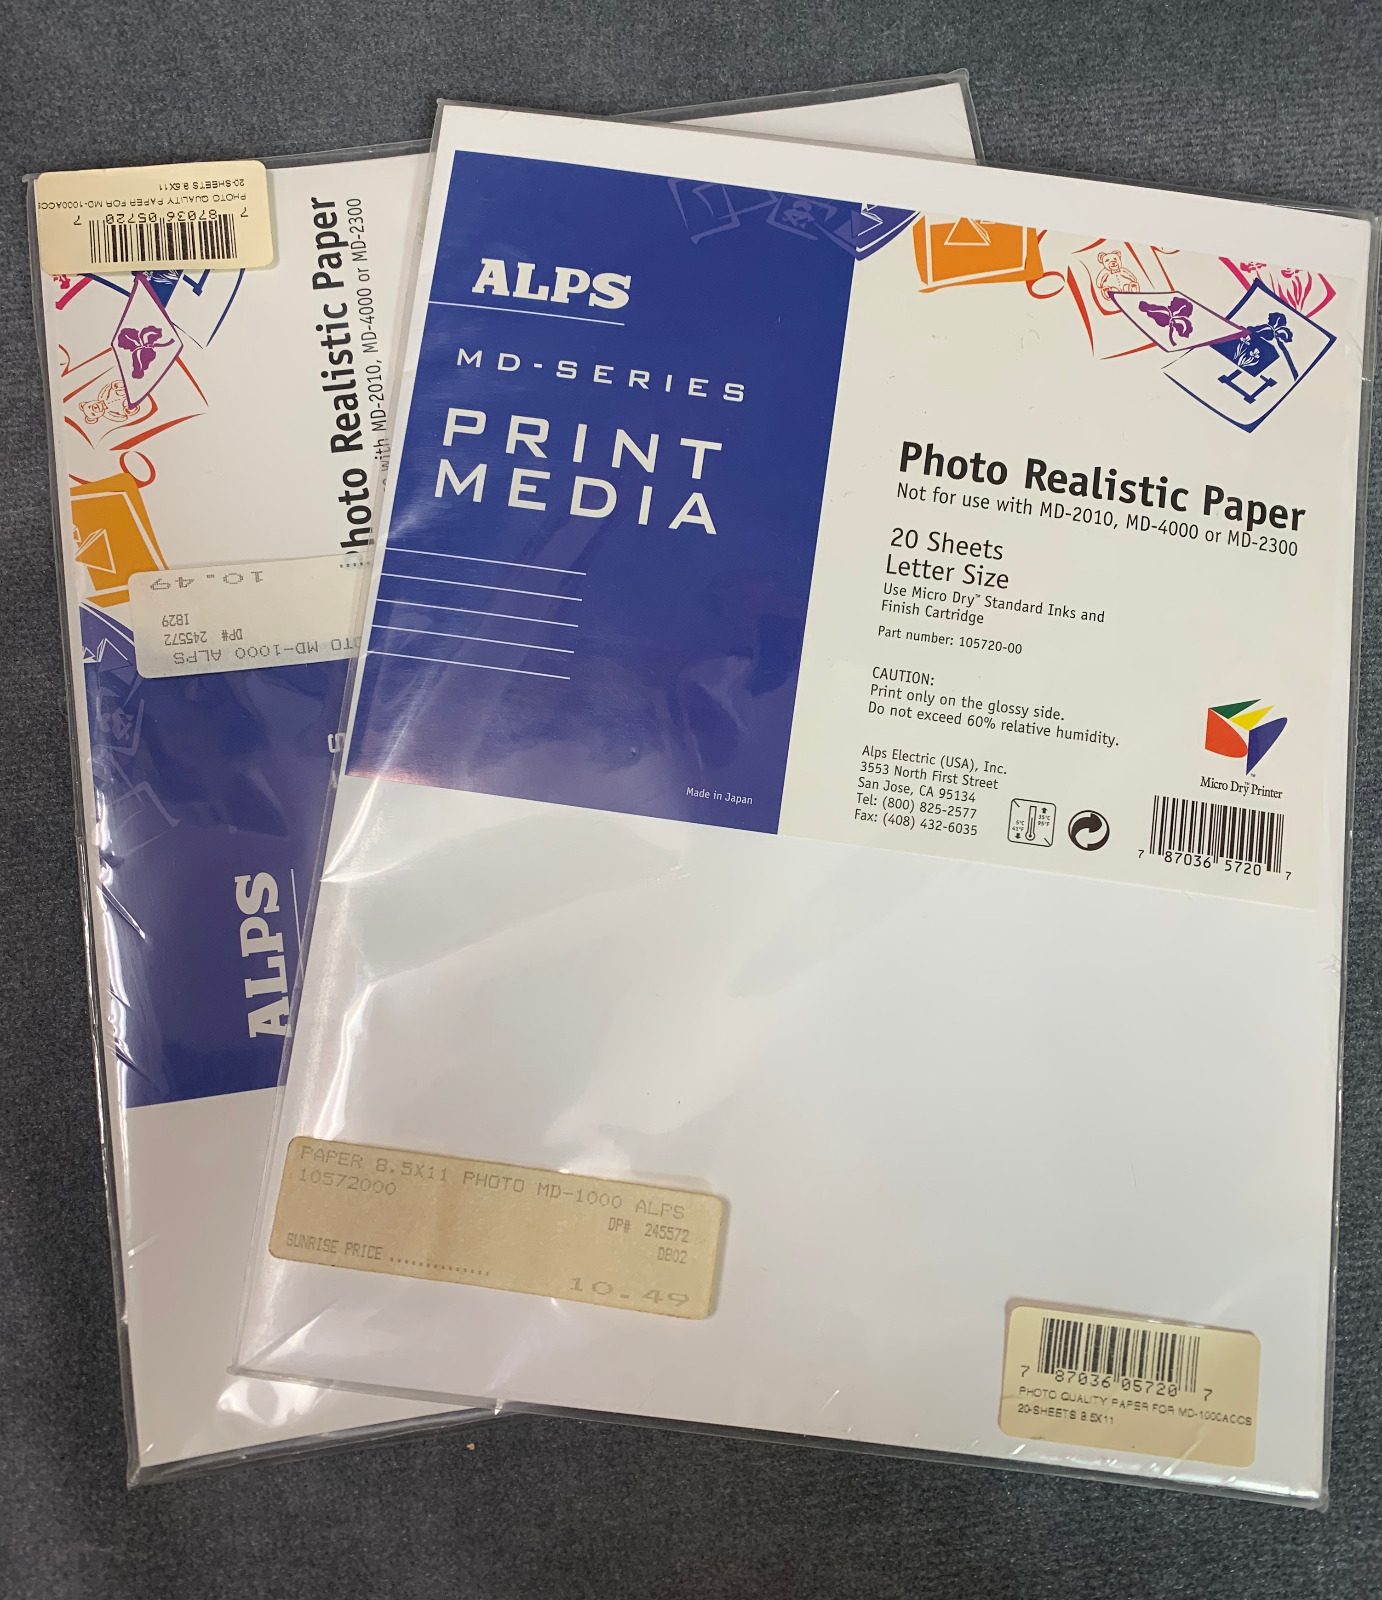 [LOT of 2] Alps MD-Series Photo Realistic Paper 20 Sheets p/n 105720-00